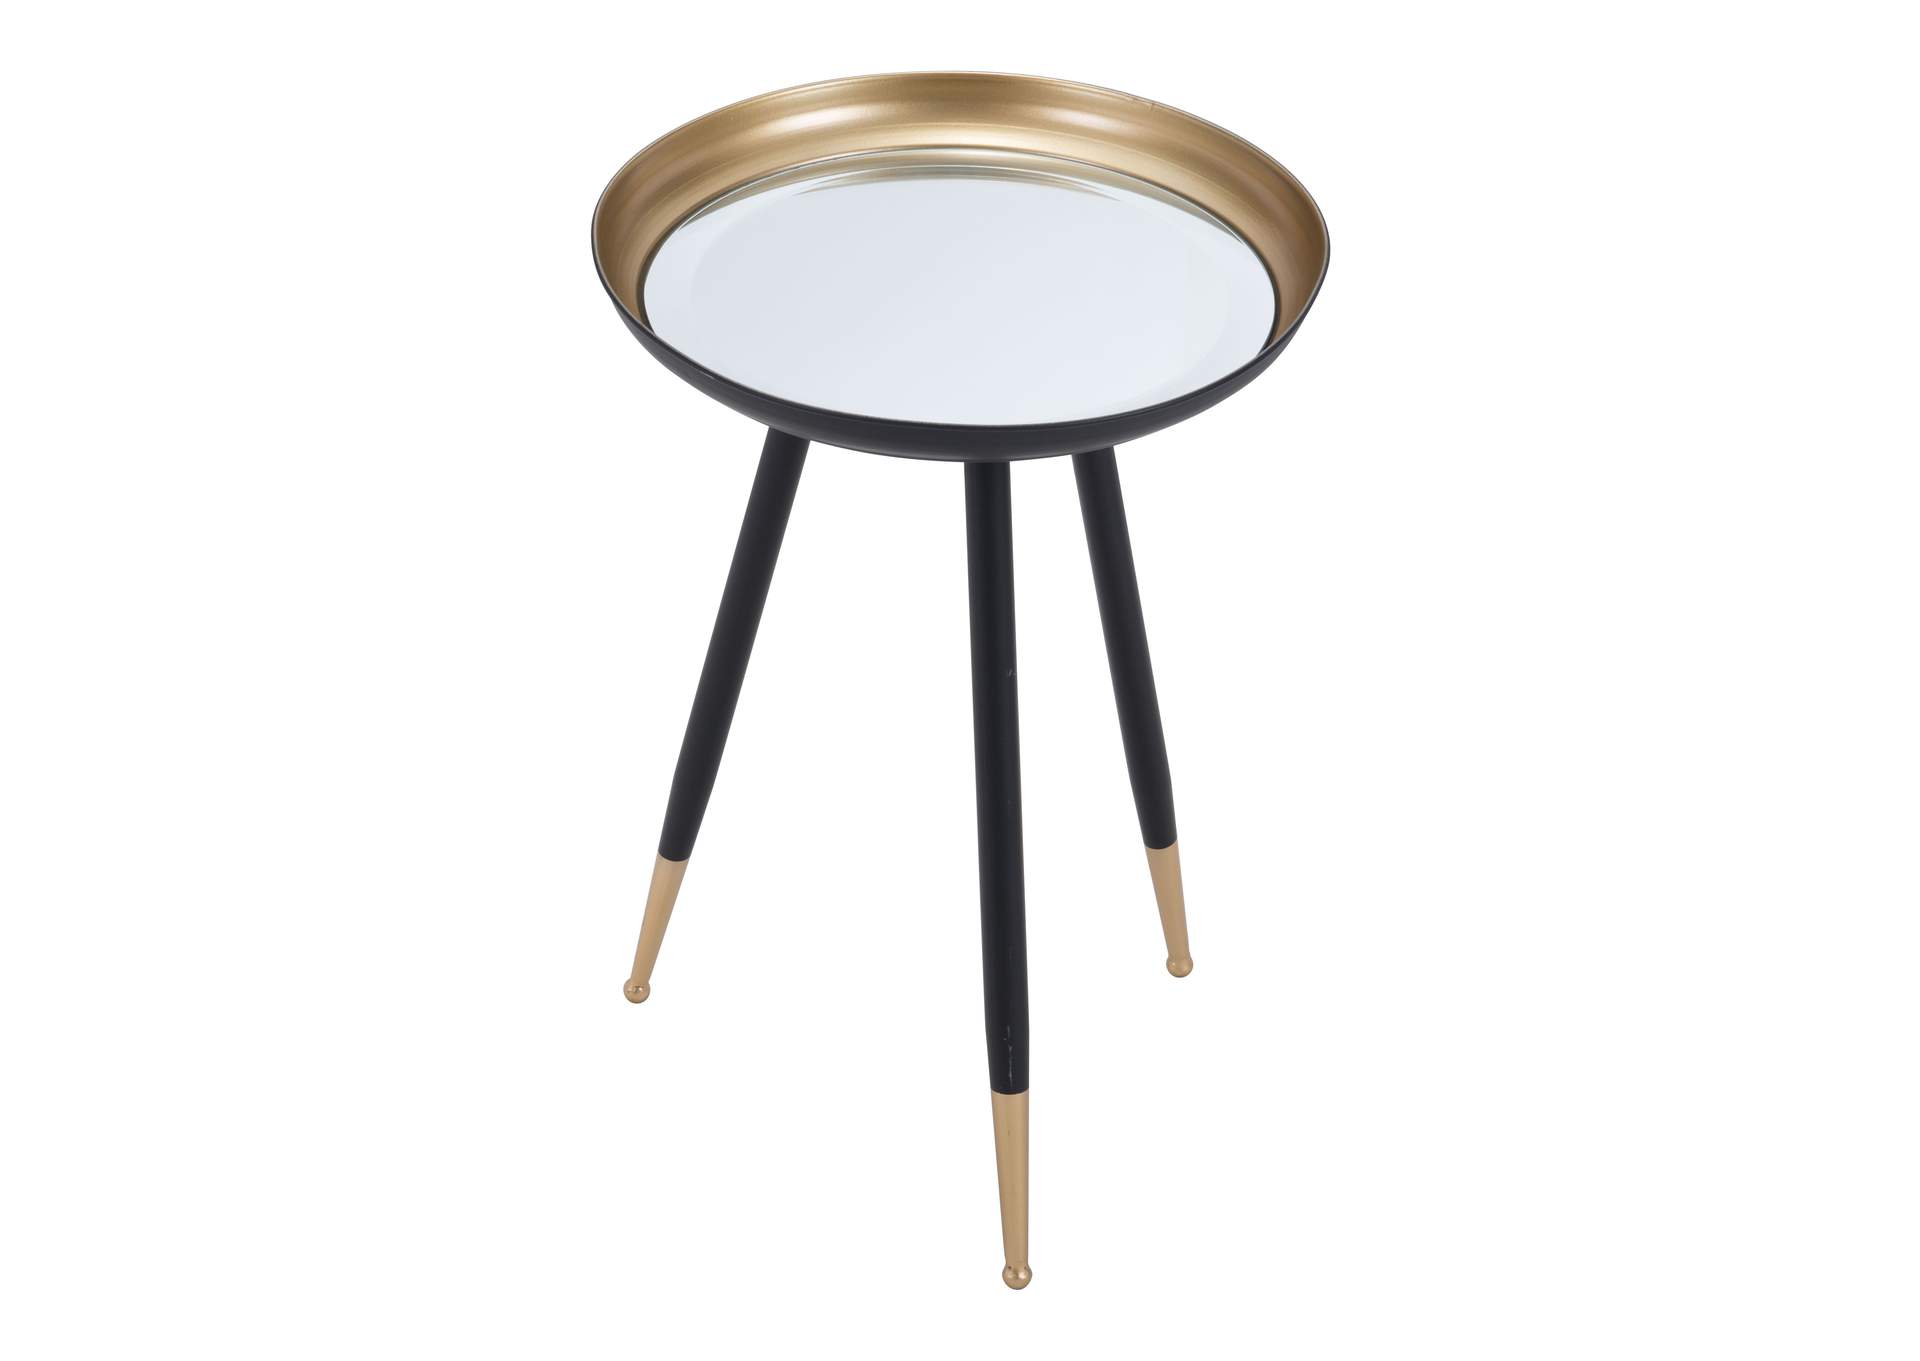 Everly Accent Table Gold & Black,Zuo